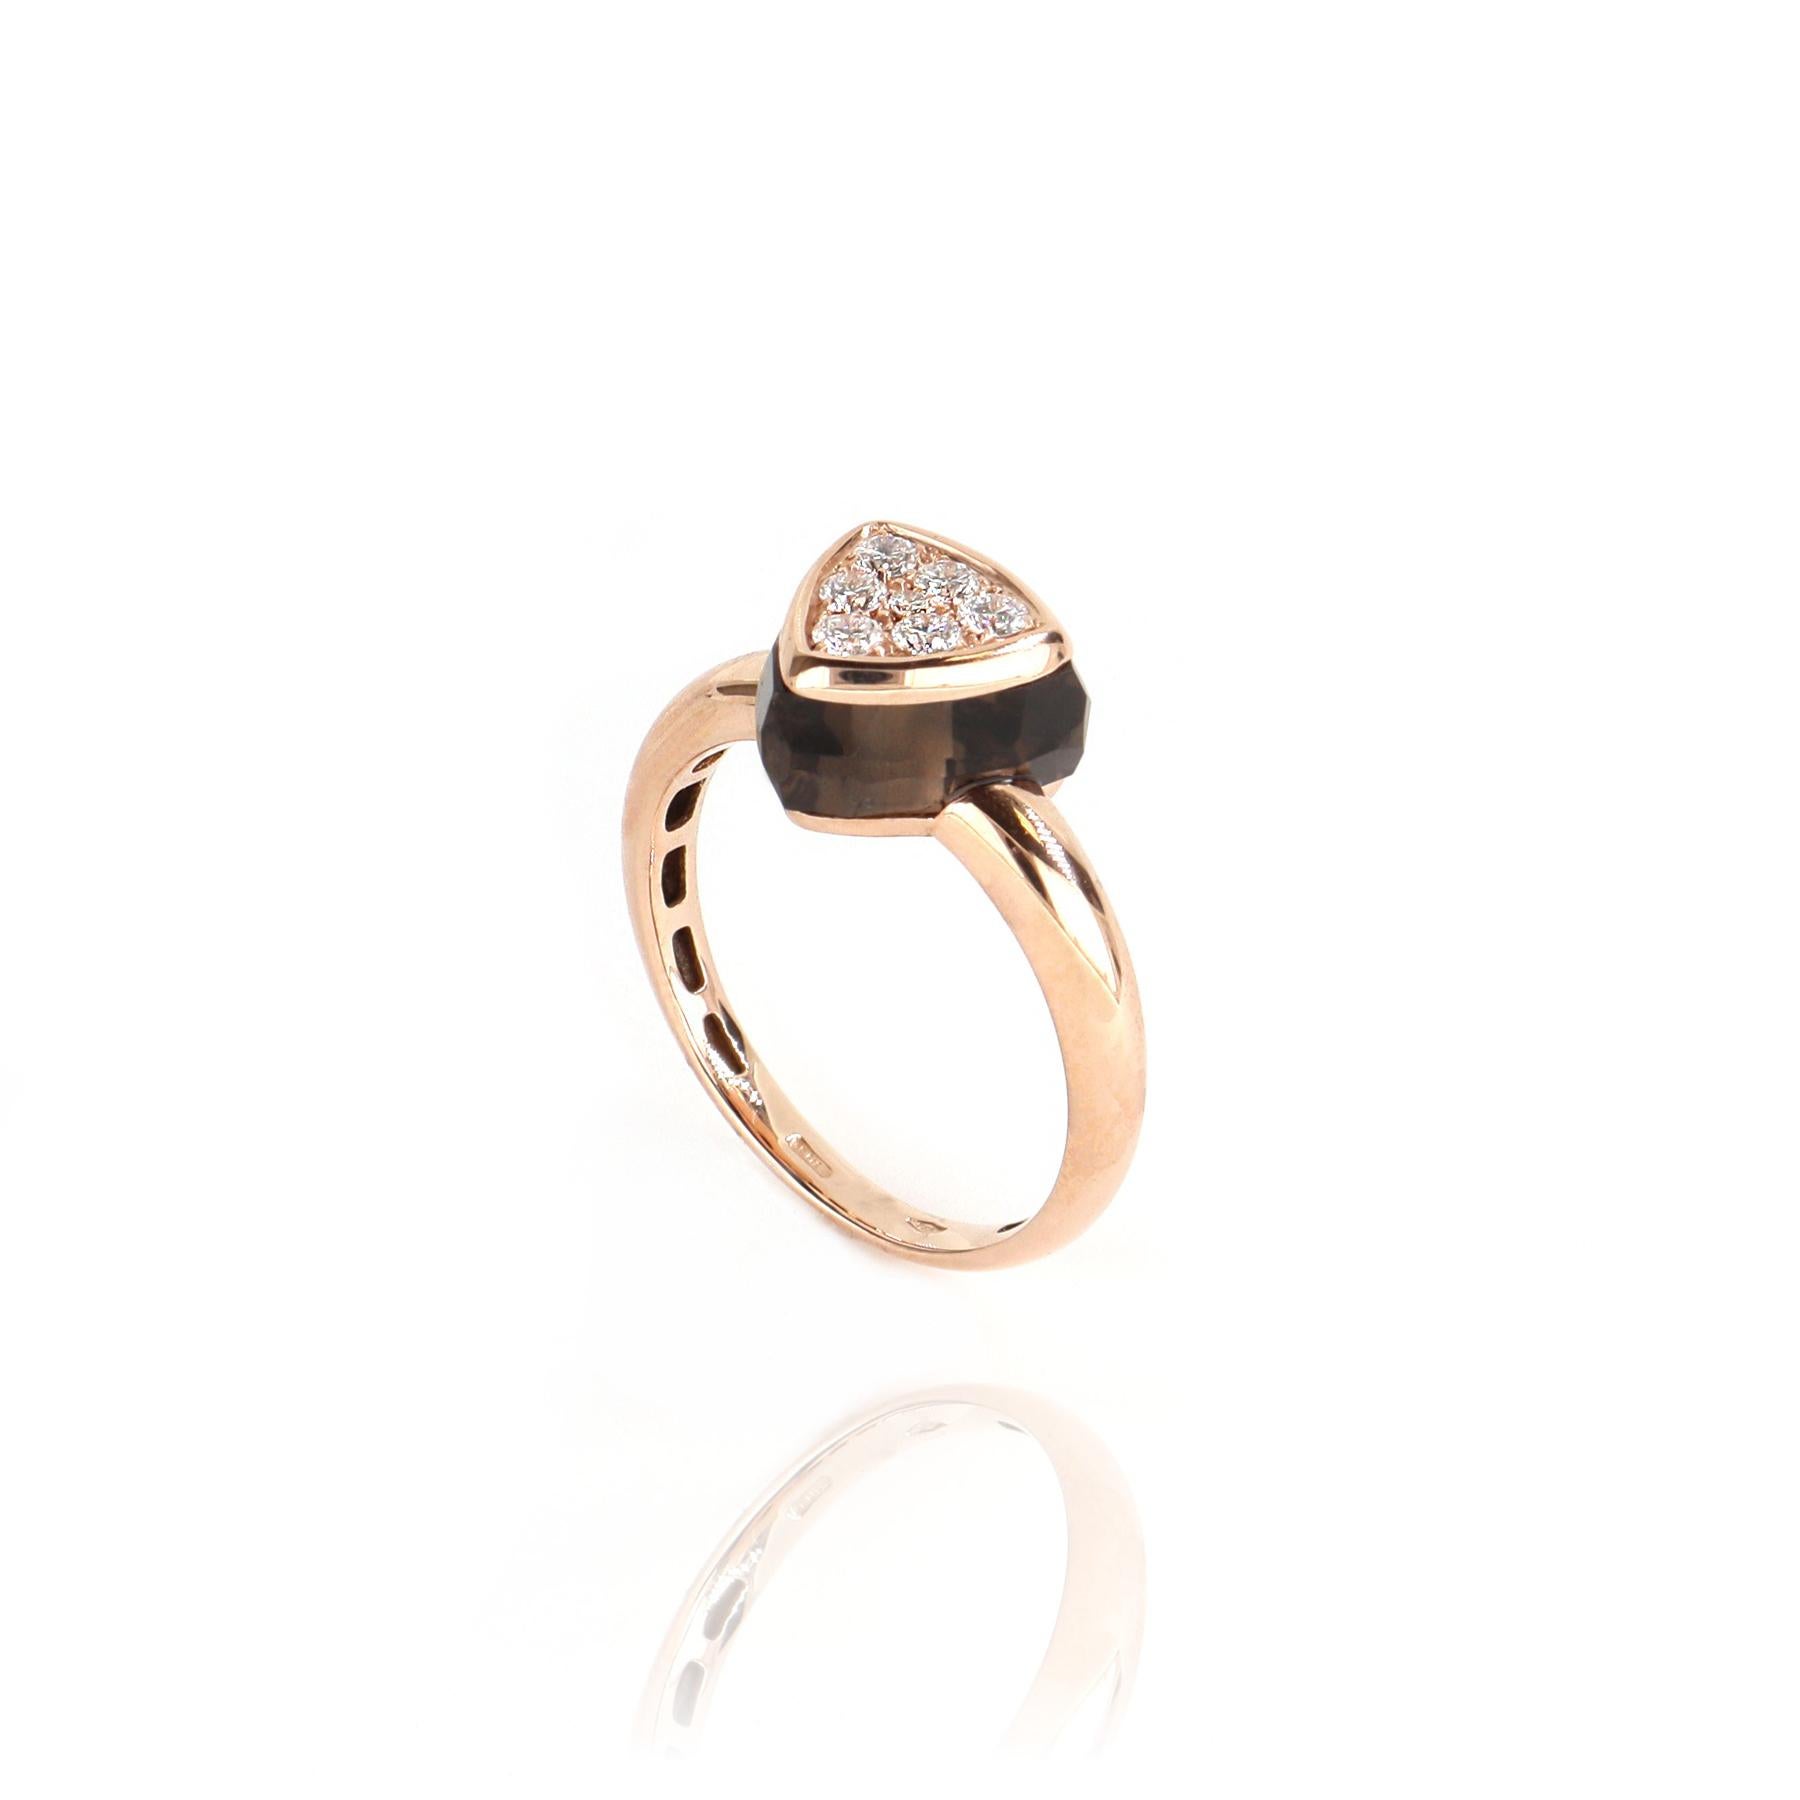 For Sale:  Les Petits Bonbons Ring Triangle with Smoky Quartz and Diamonds